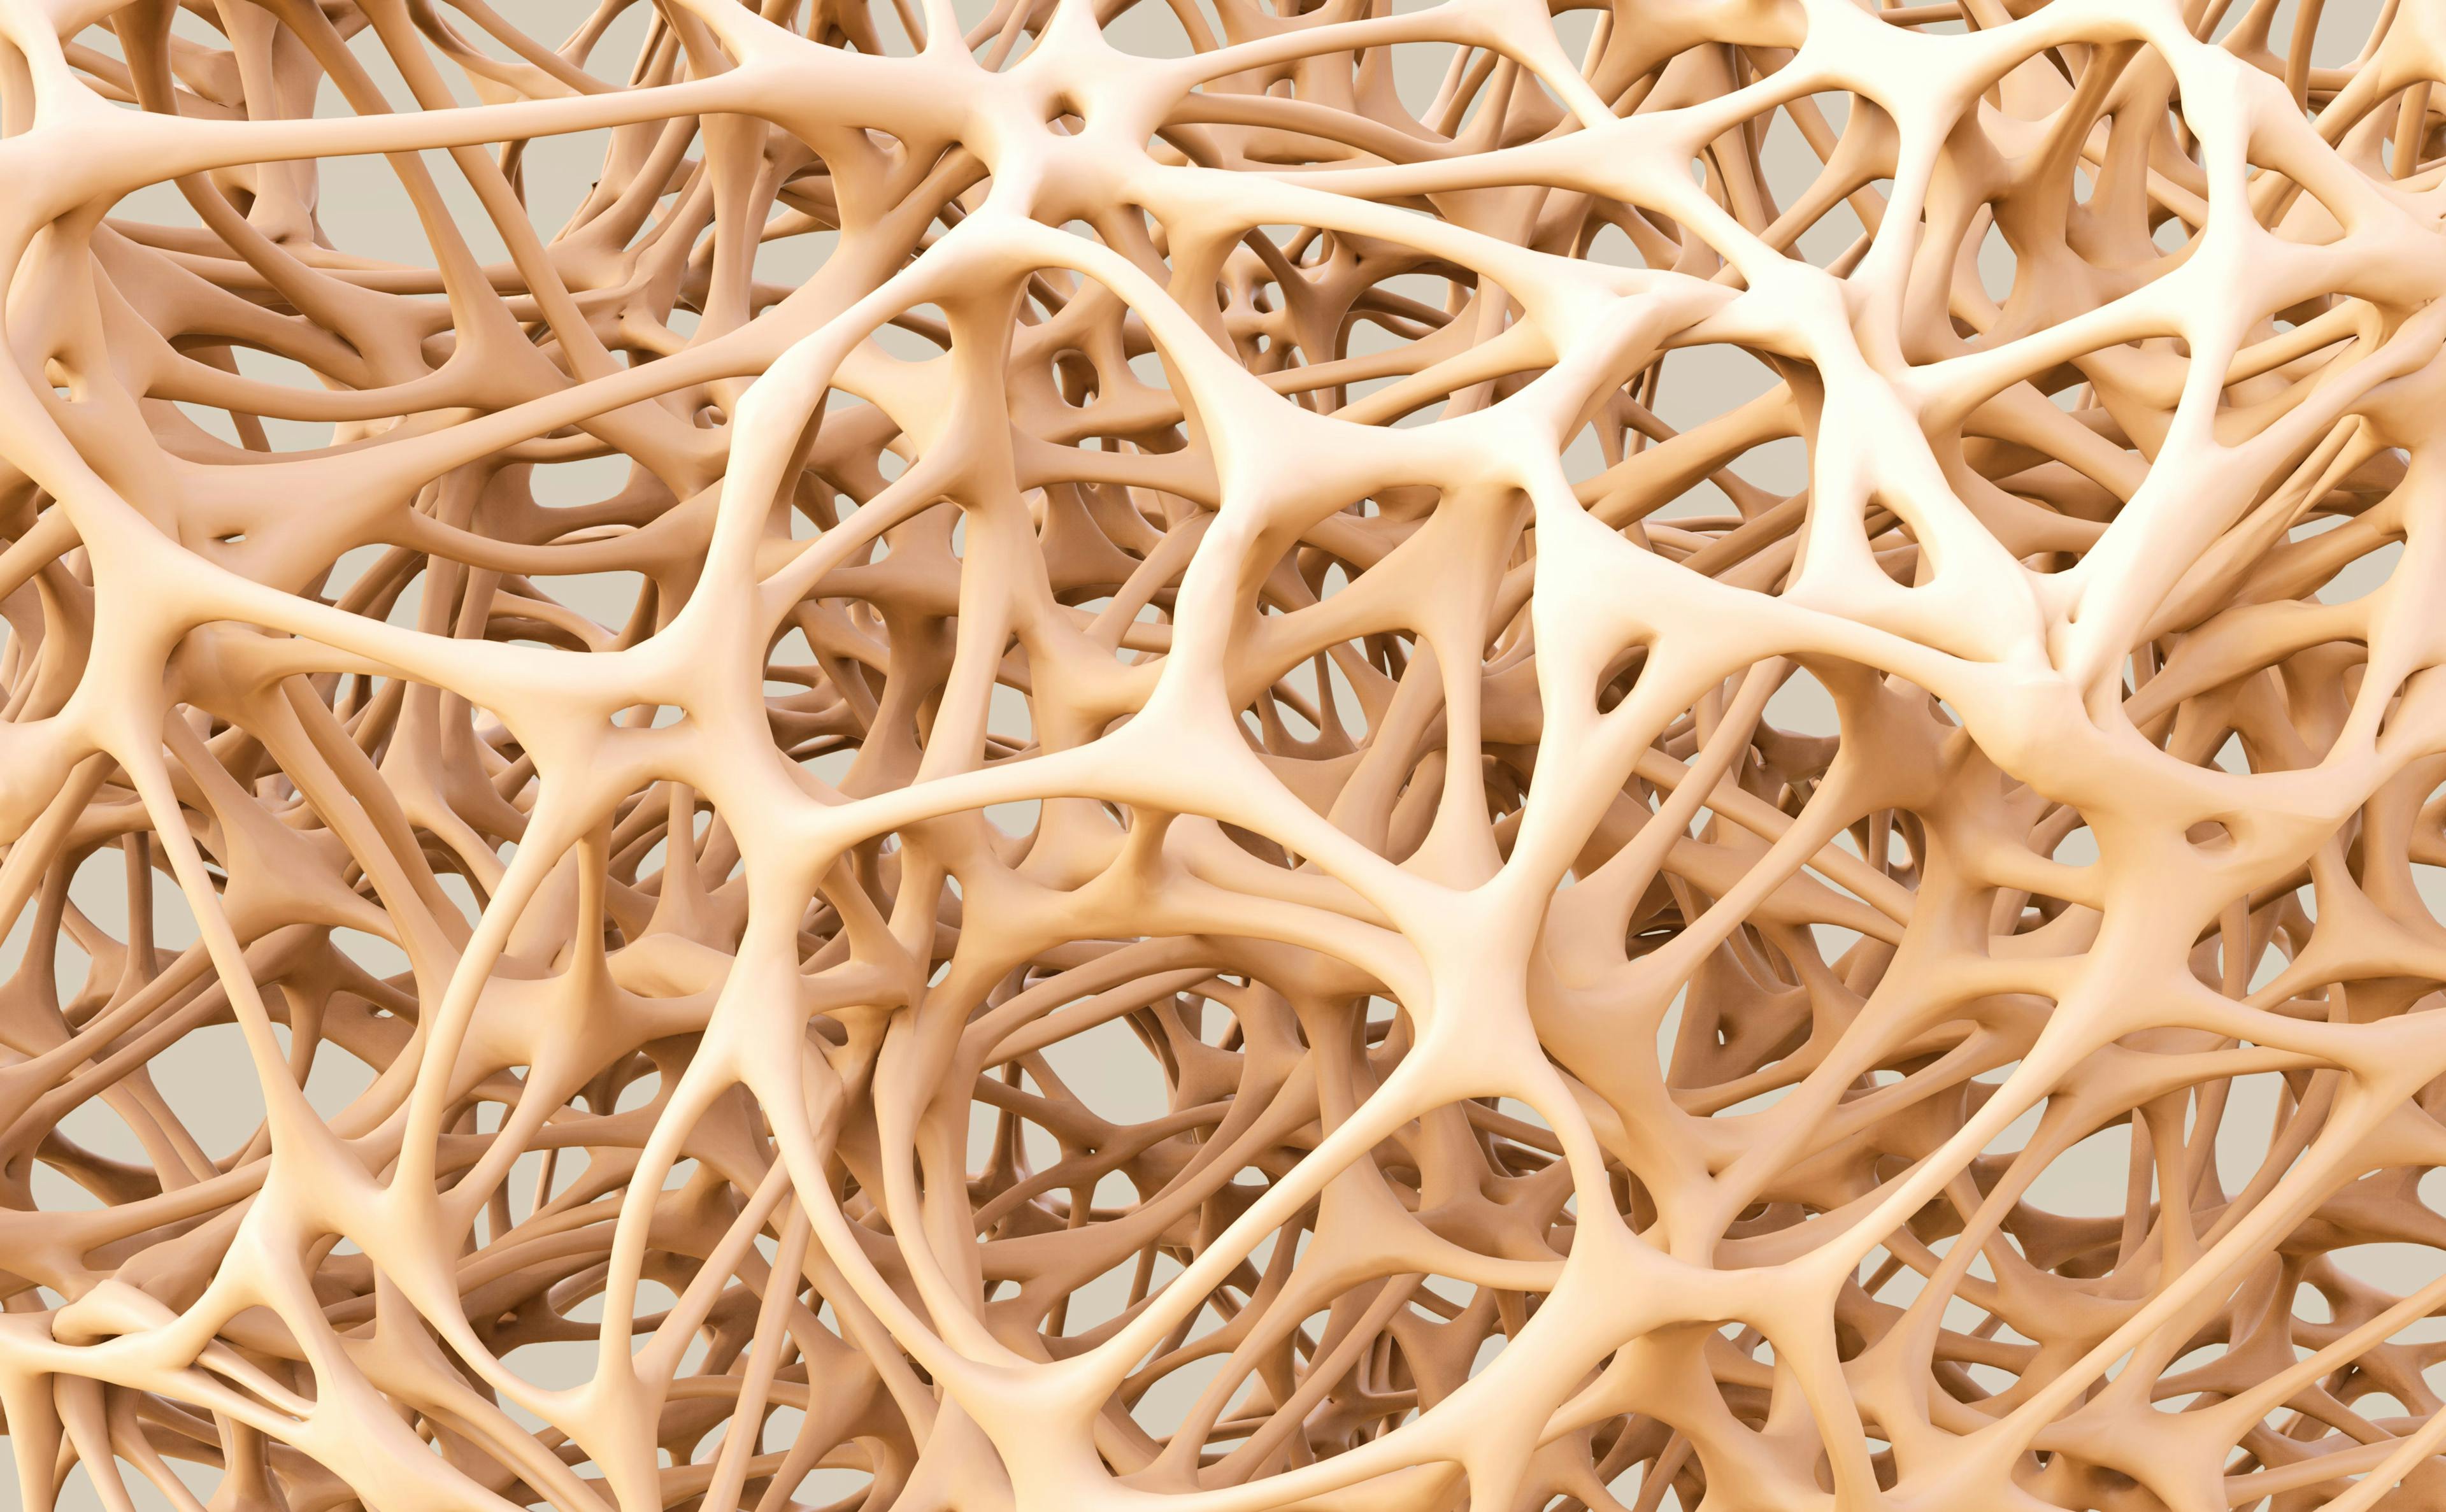 Clinicians Could be Missing the Mark When Prescribing Osteoporosis Therapies